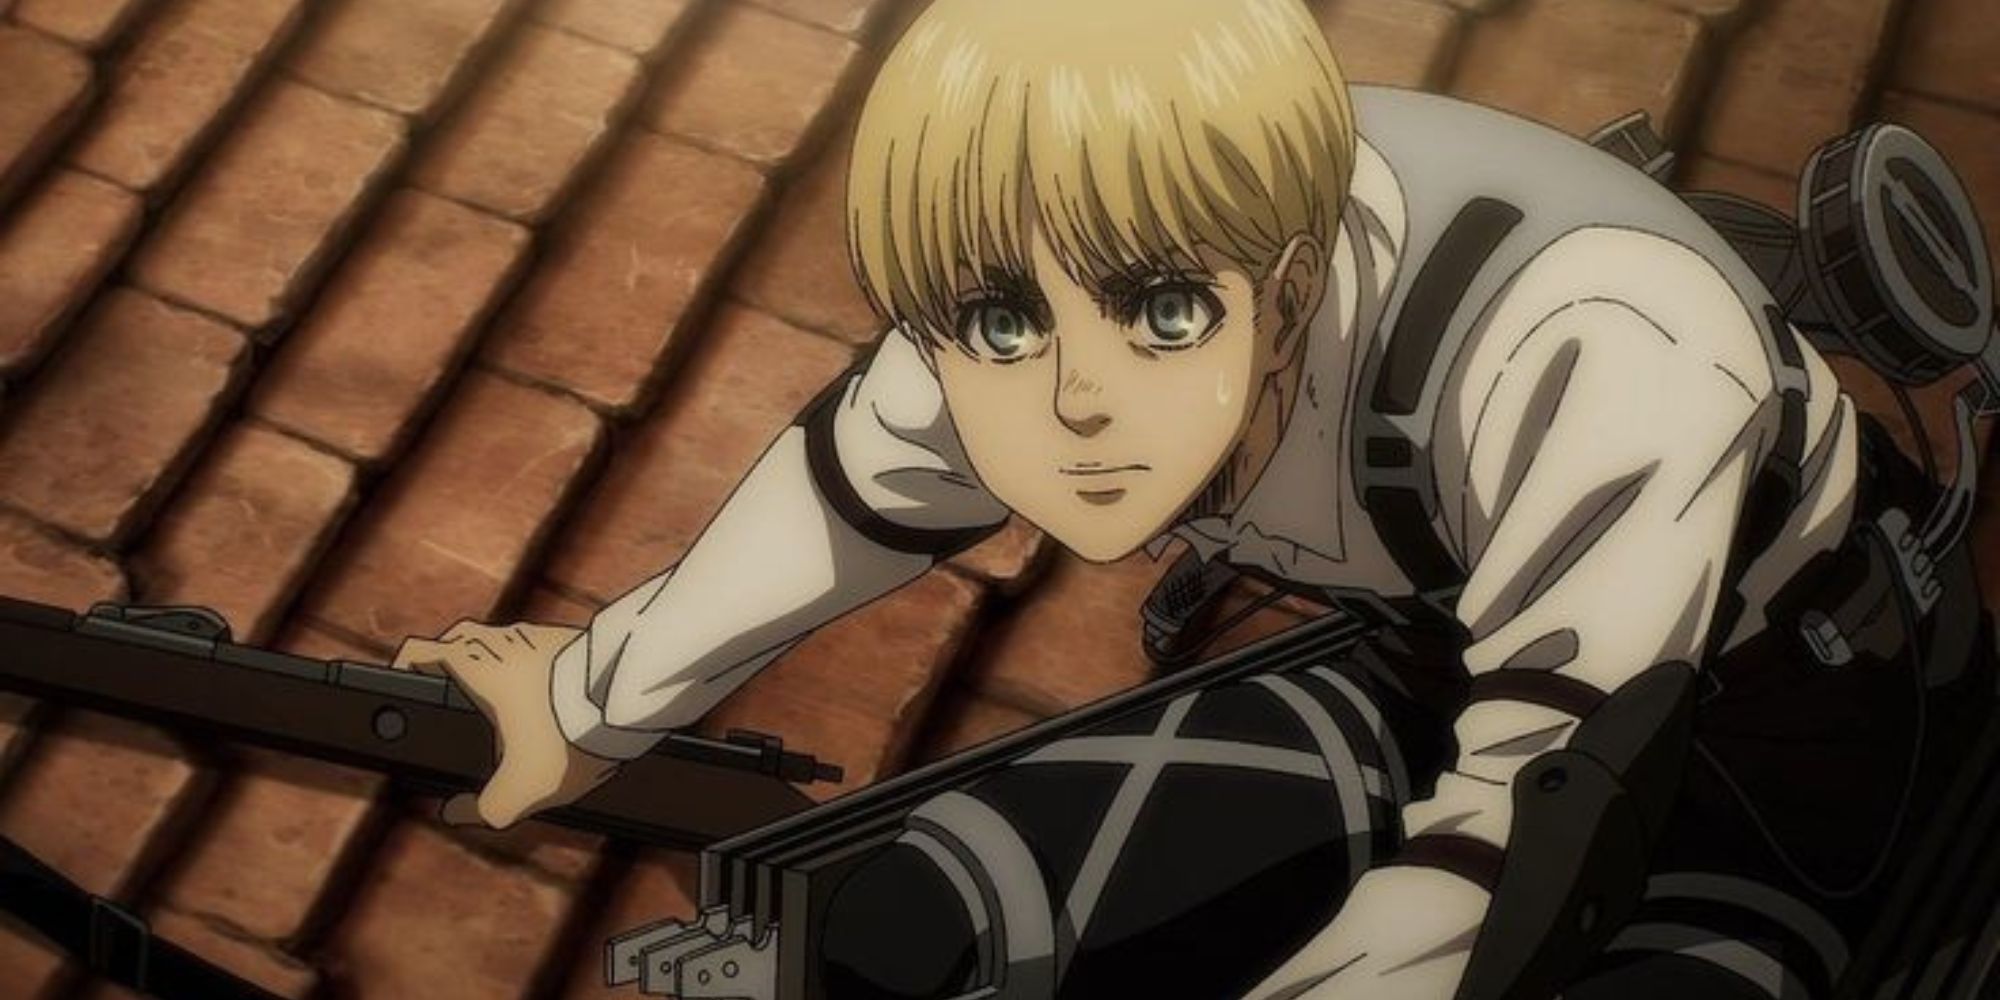 Attack on Titan Armin Arlert fights the colossal titans and the Jaeger during the rumble